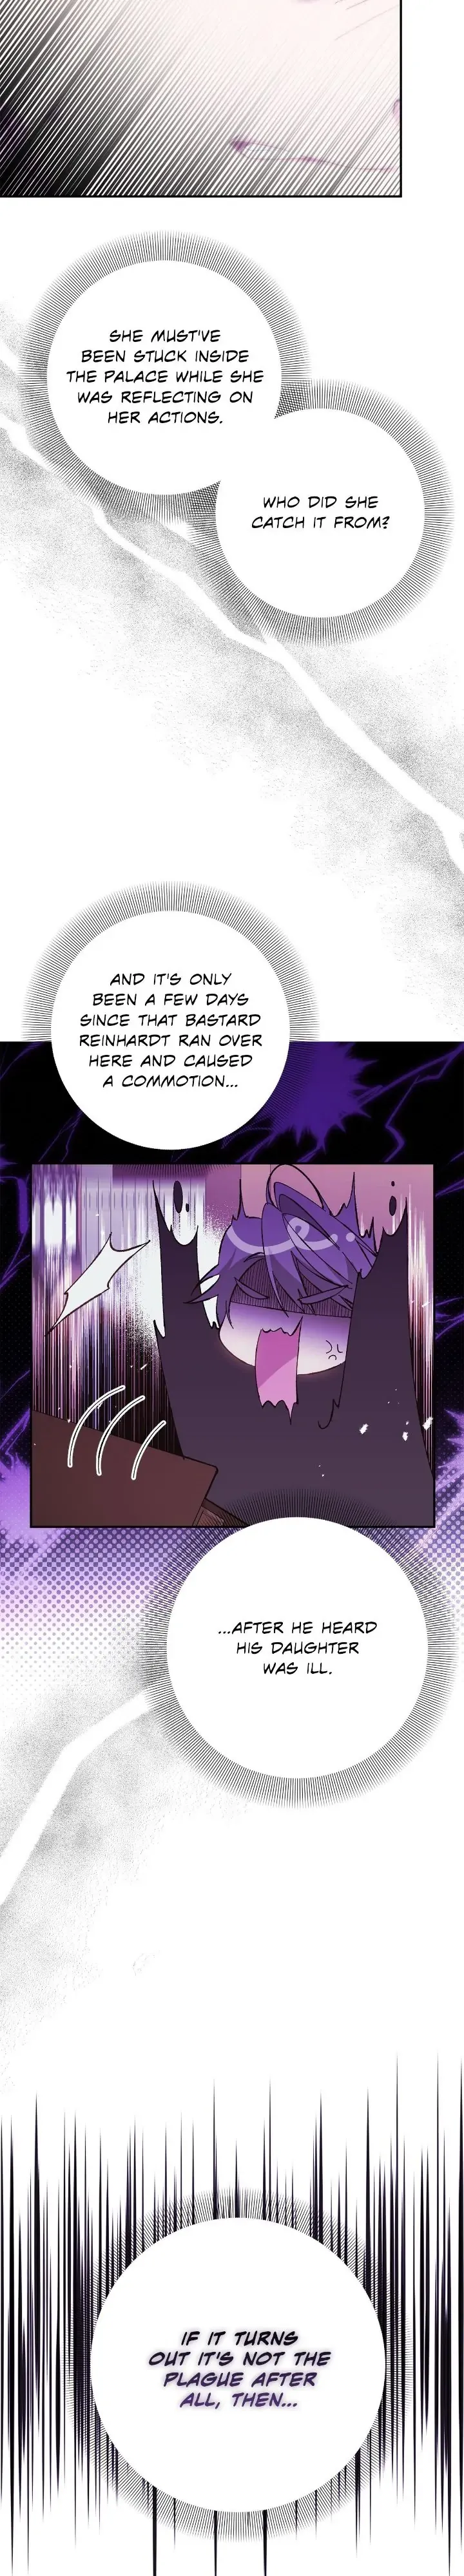 It’s Useless To Hang On Chapter 151 page 11